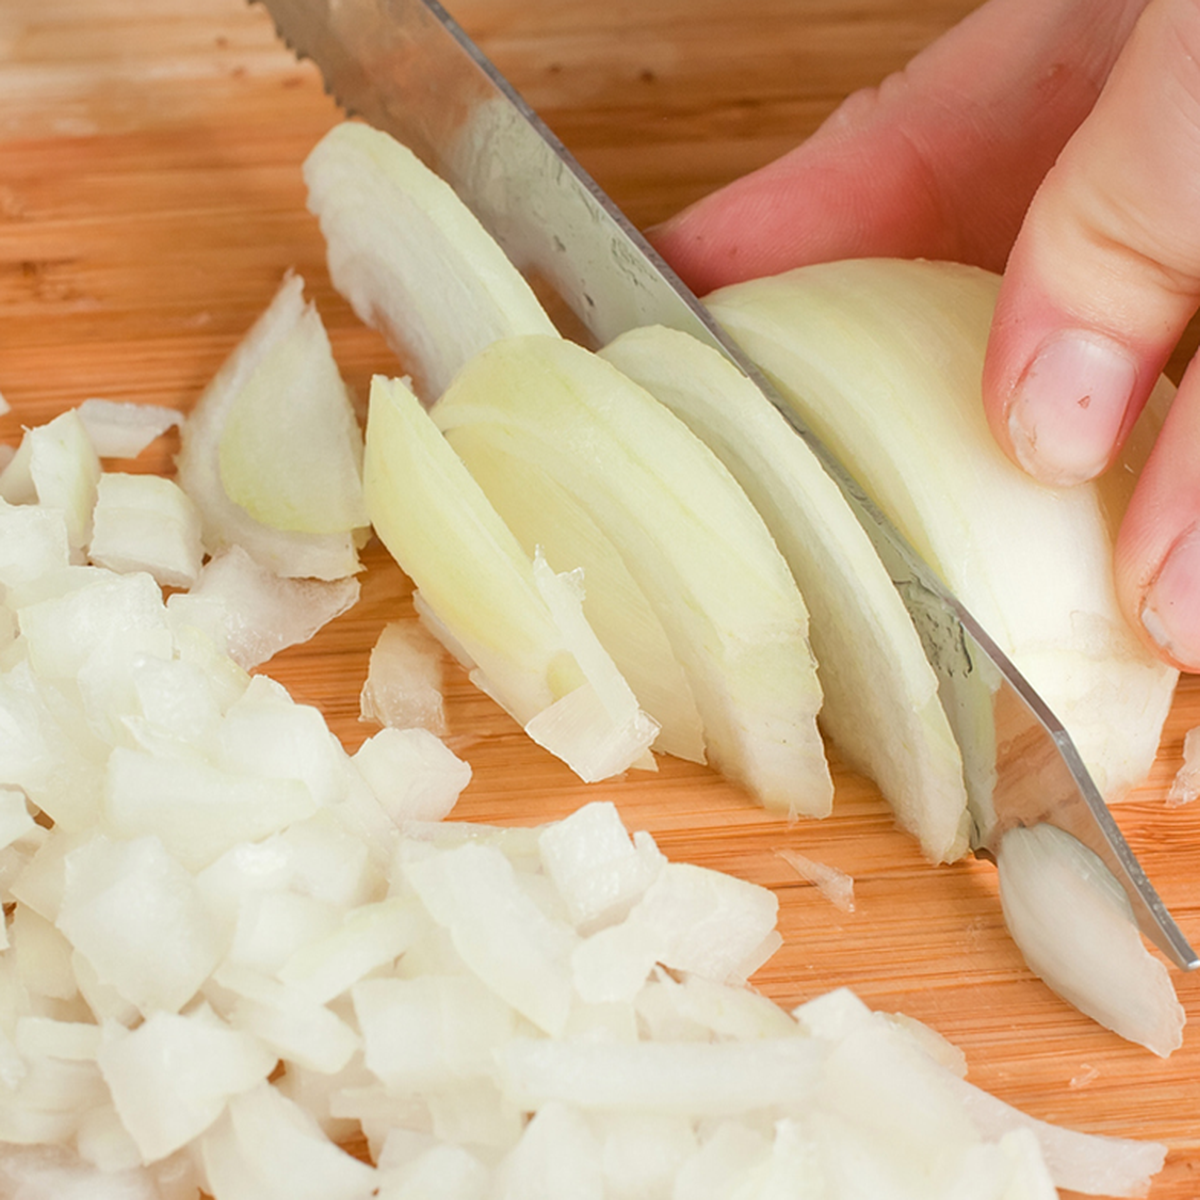 This Kitchen Tool Is My Secret Weapon for Cutting Onions Without Crying